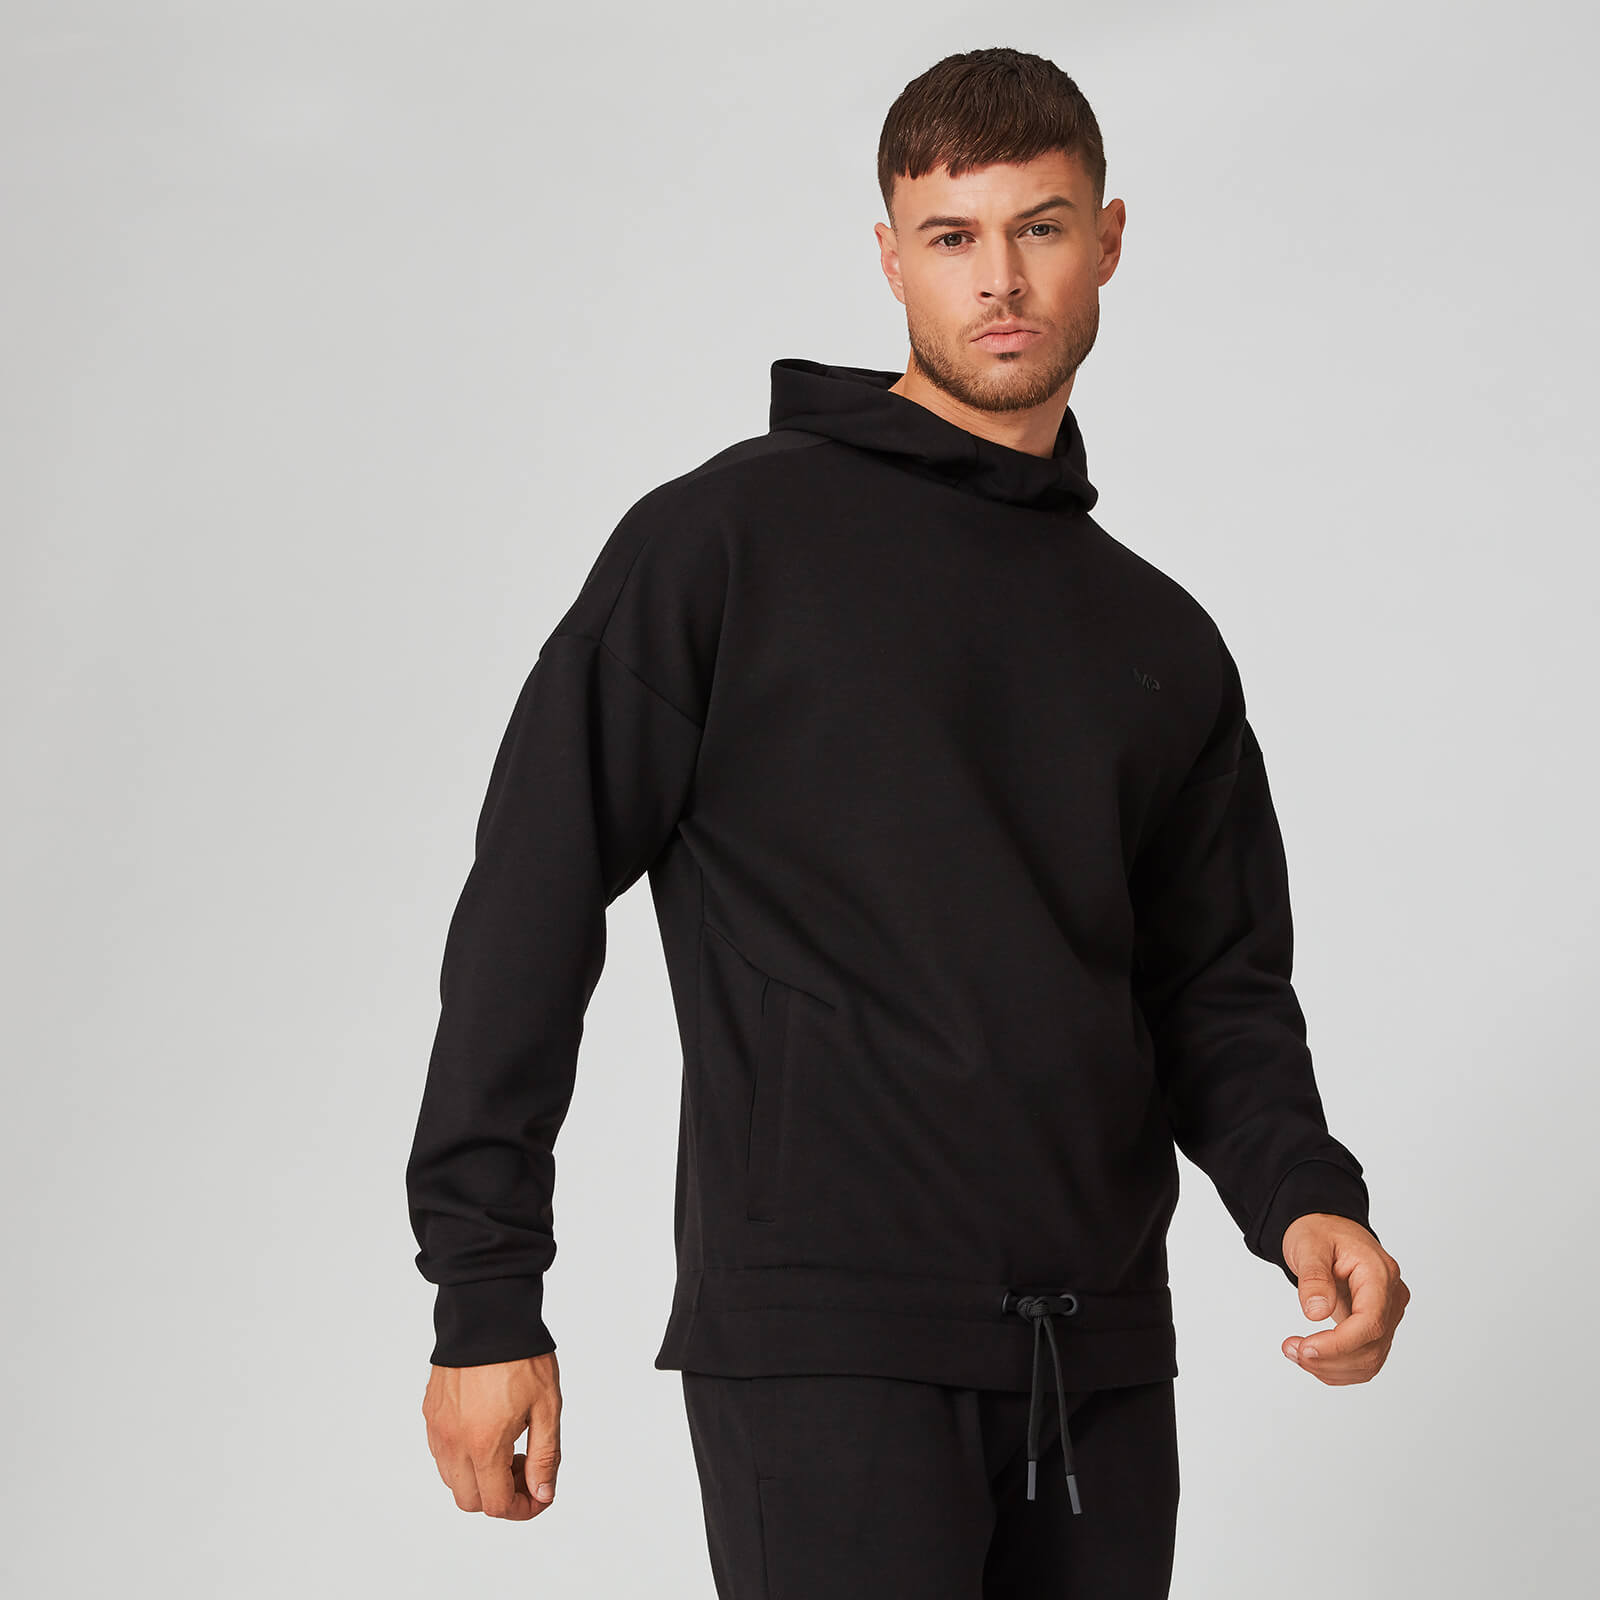 Form Pro Pullover Hoodie - Black - XS